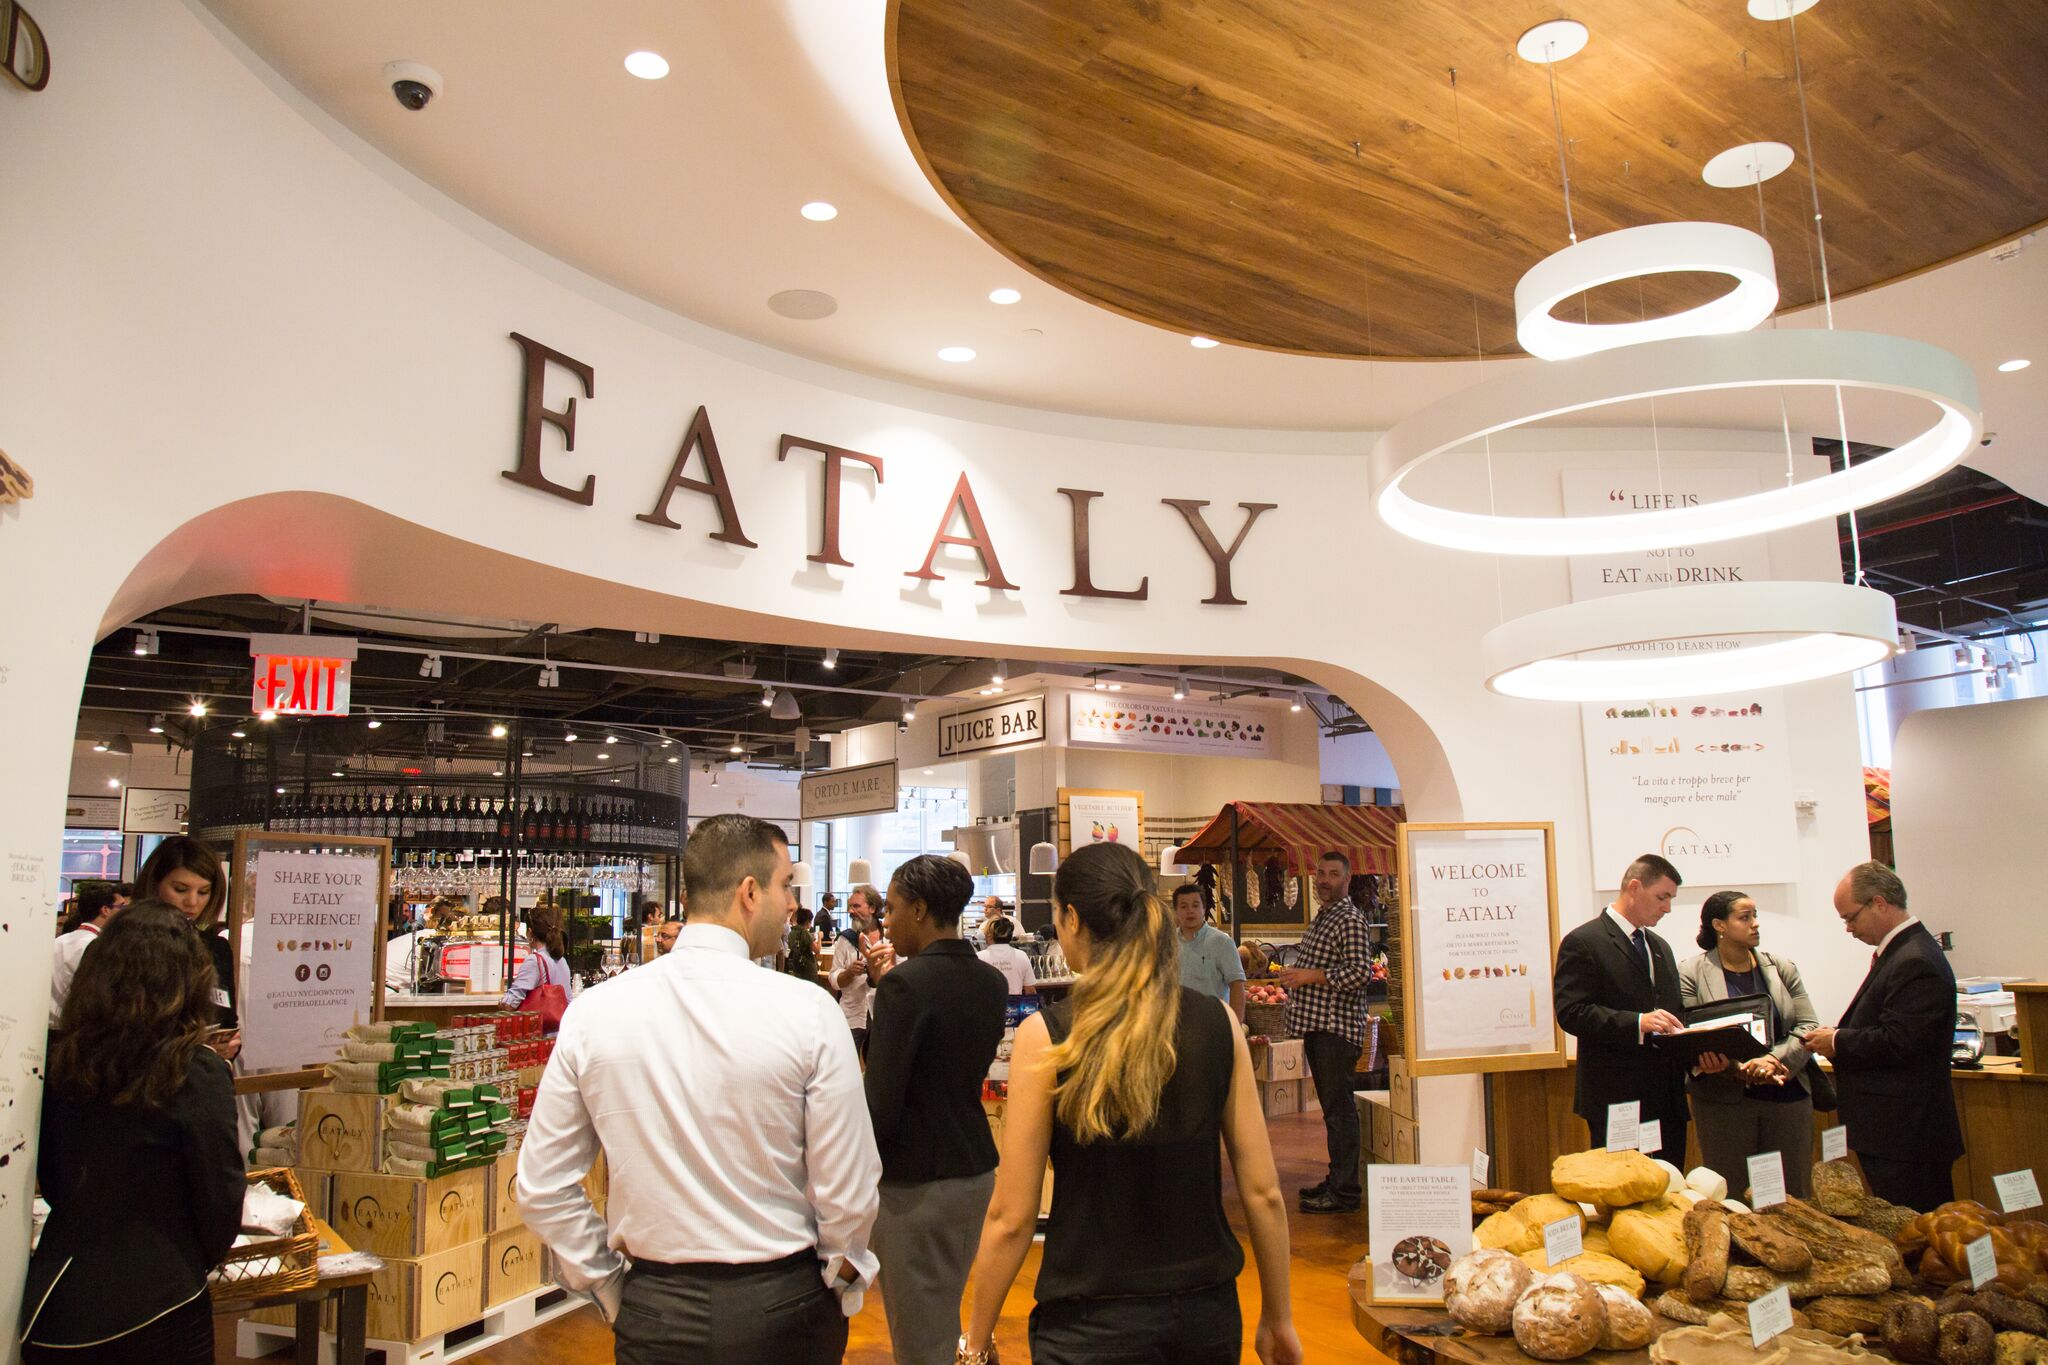 Eataly will open its second location in New York this month in the Financial District at 4 WTC